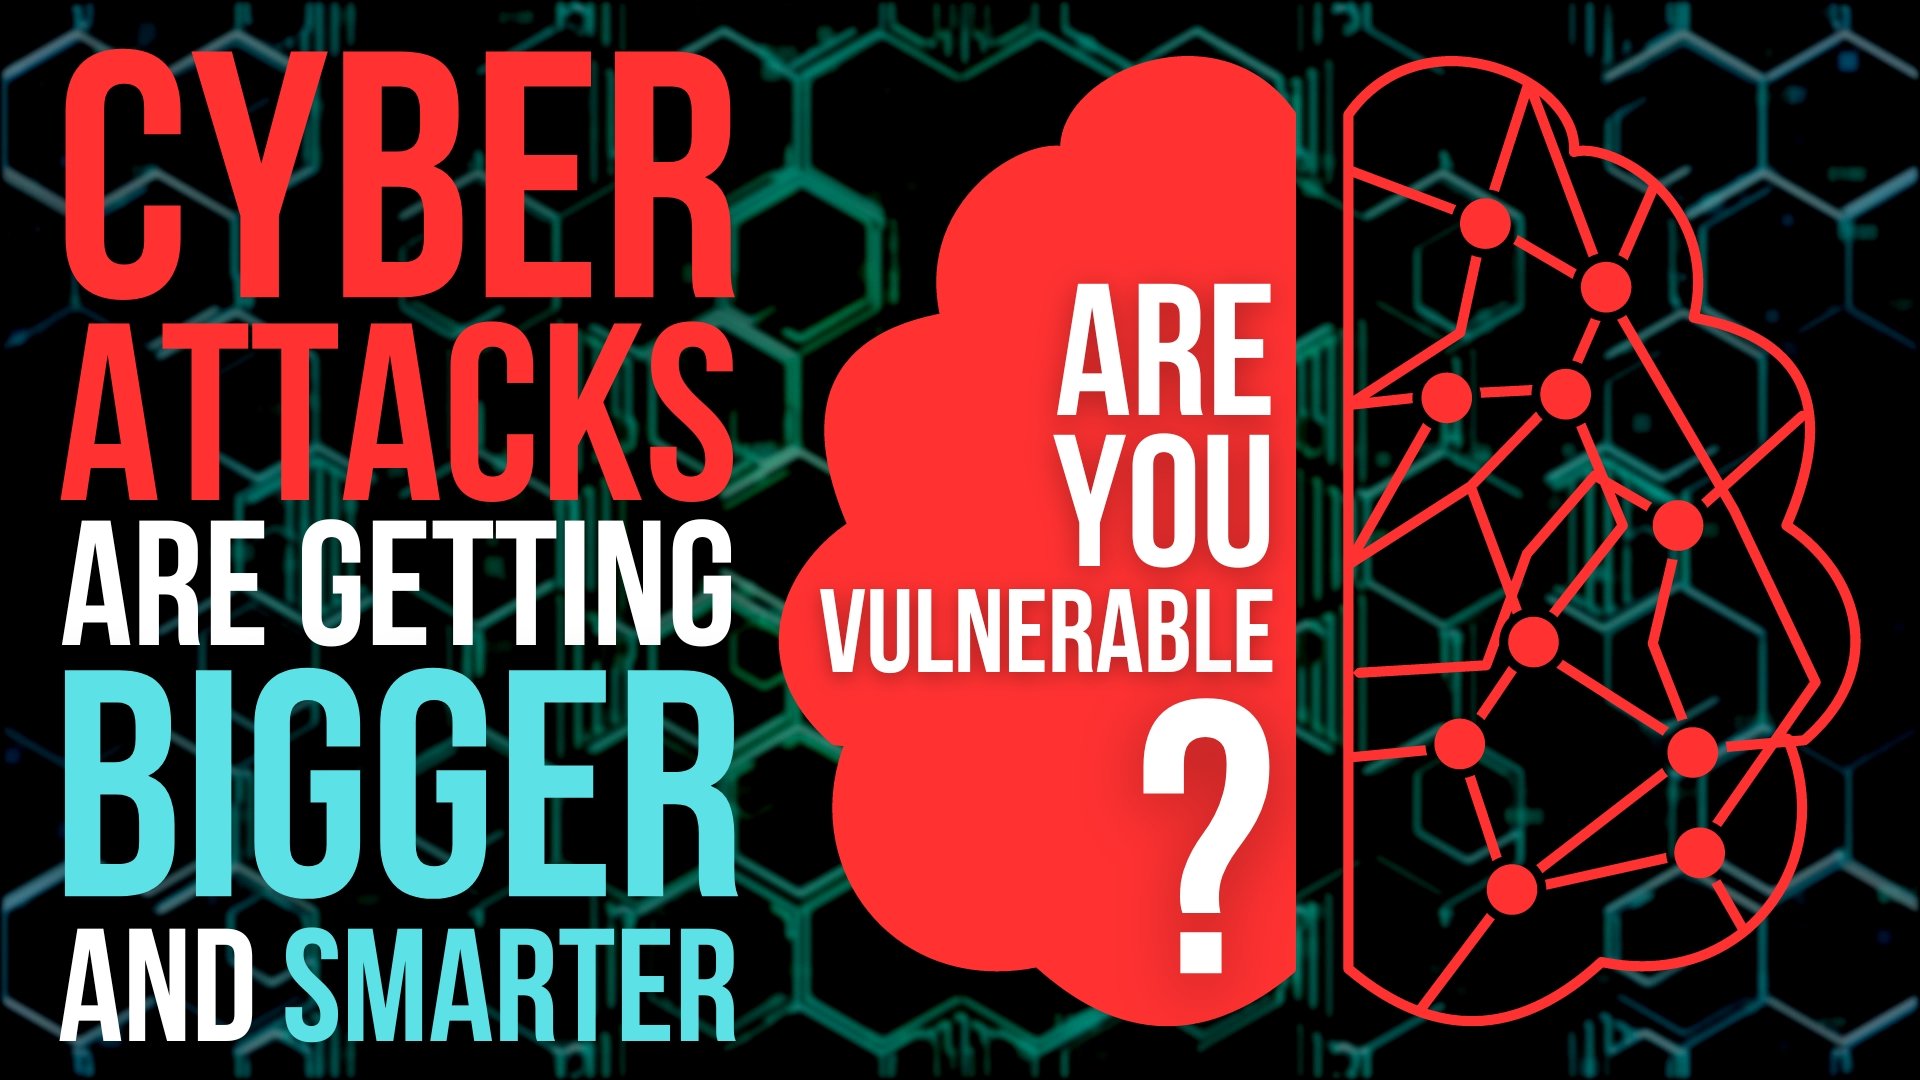 Cyber attacks are getting bigger and smarter. Are you vulnerable? 